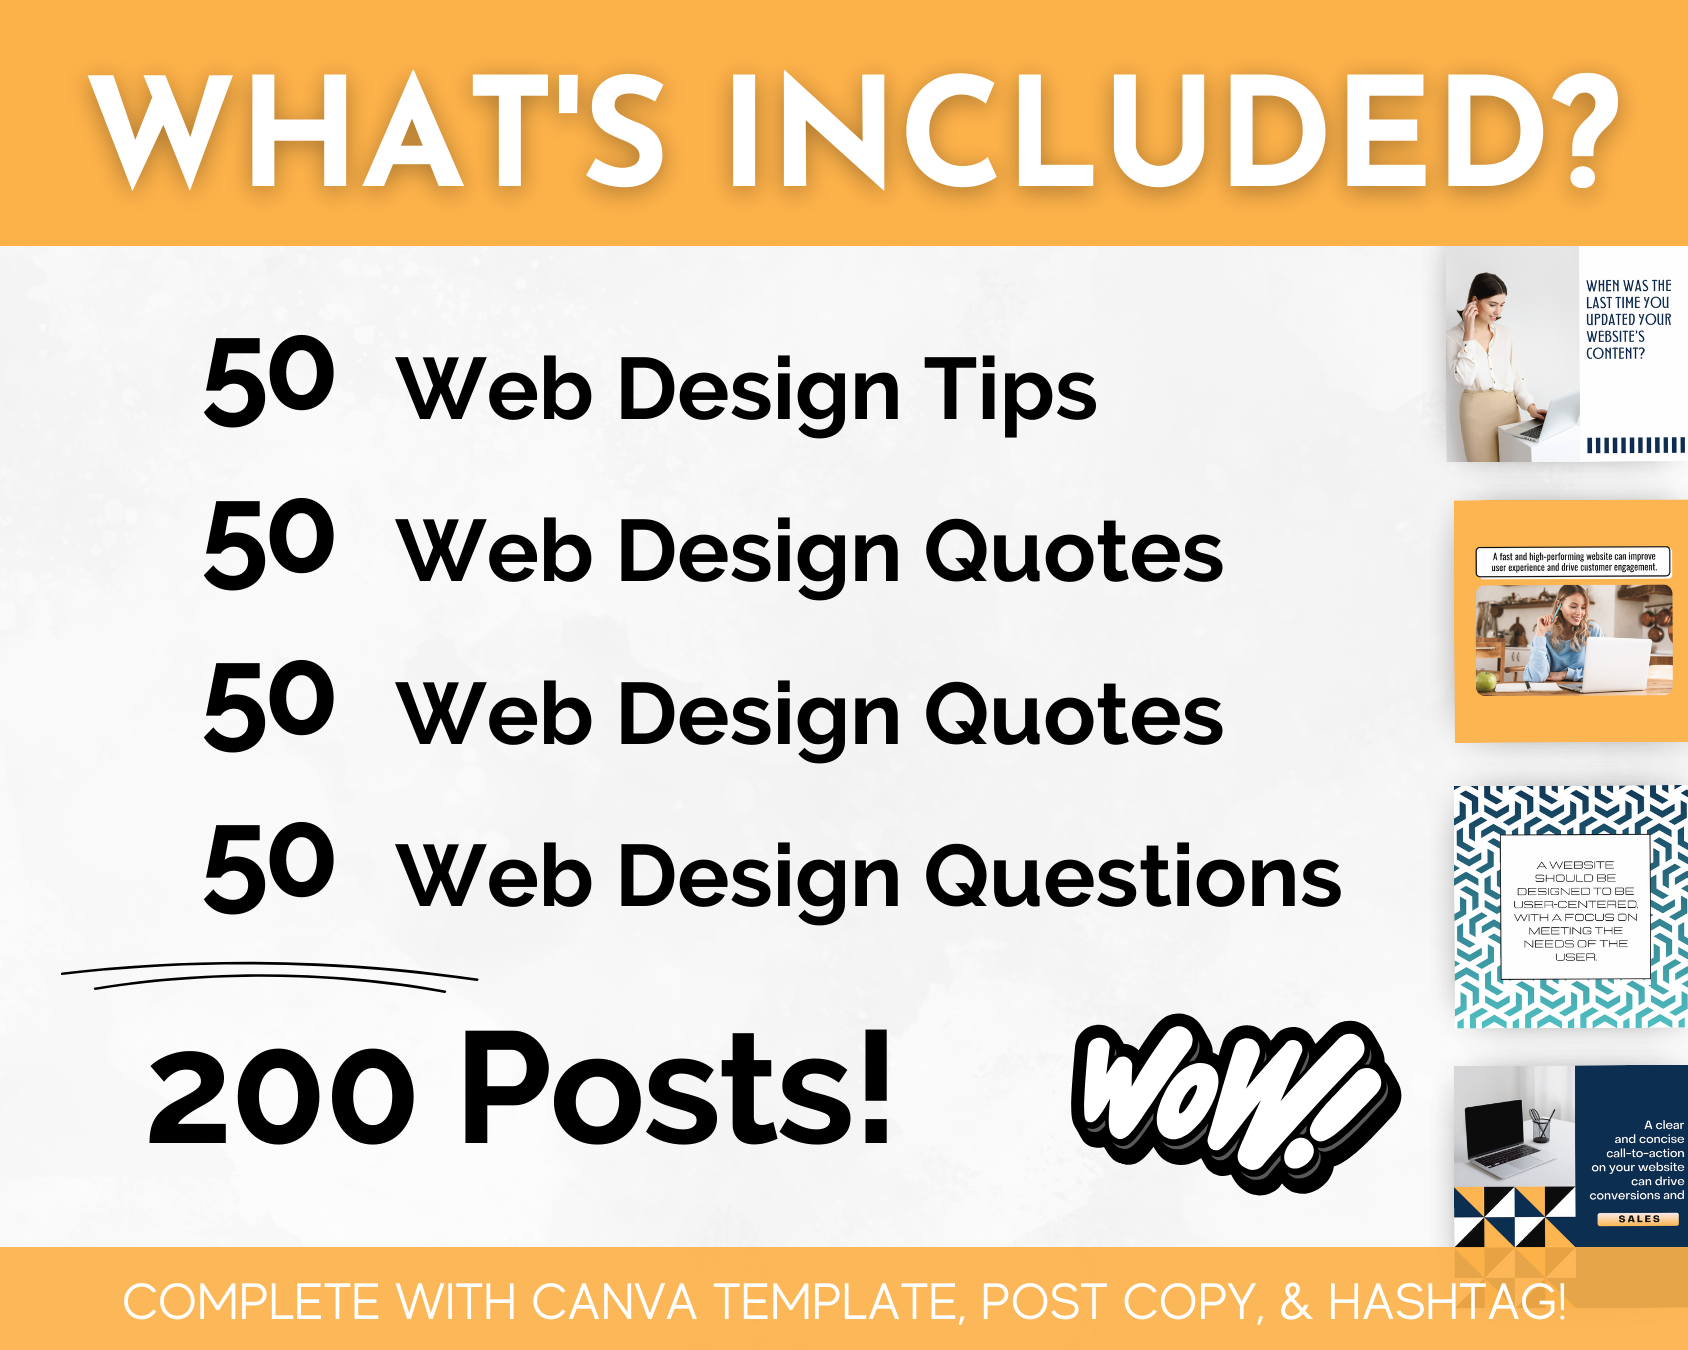 What's included in the Web Design Social Media Post Bundle with Canva Templates and SEO from Socially Inclined?